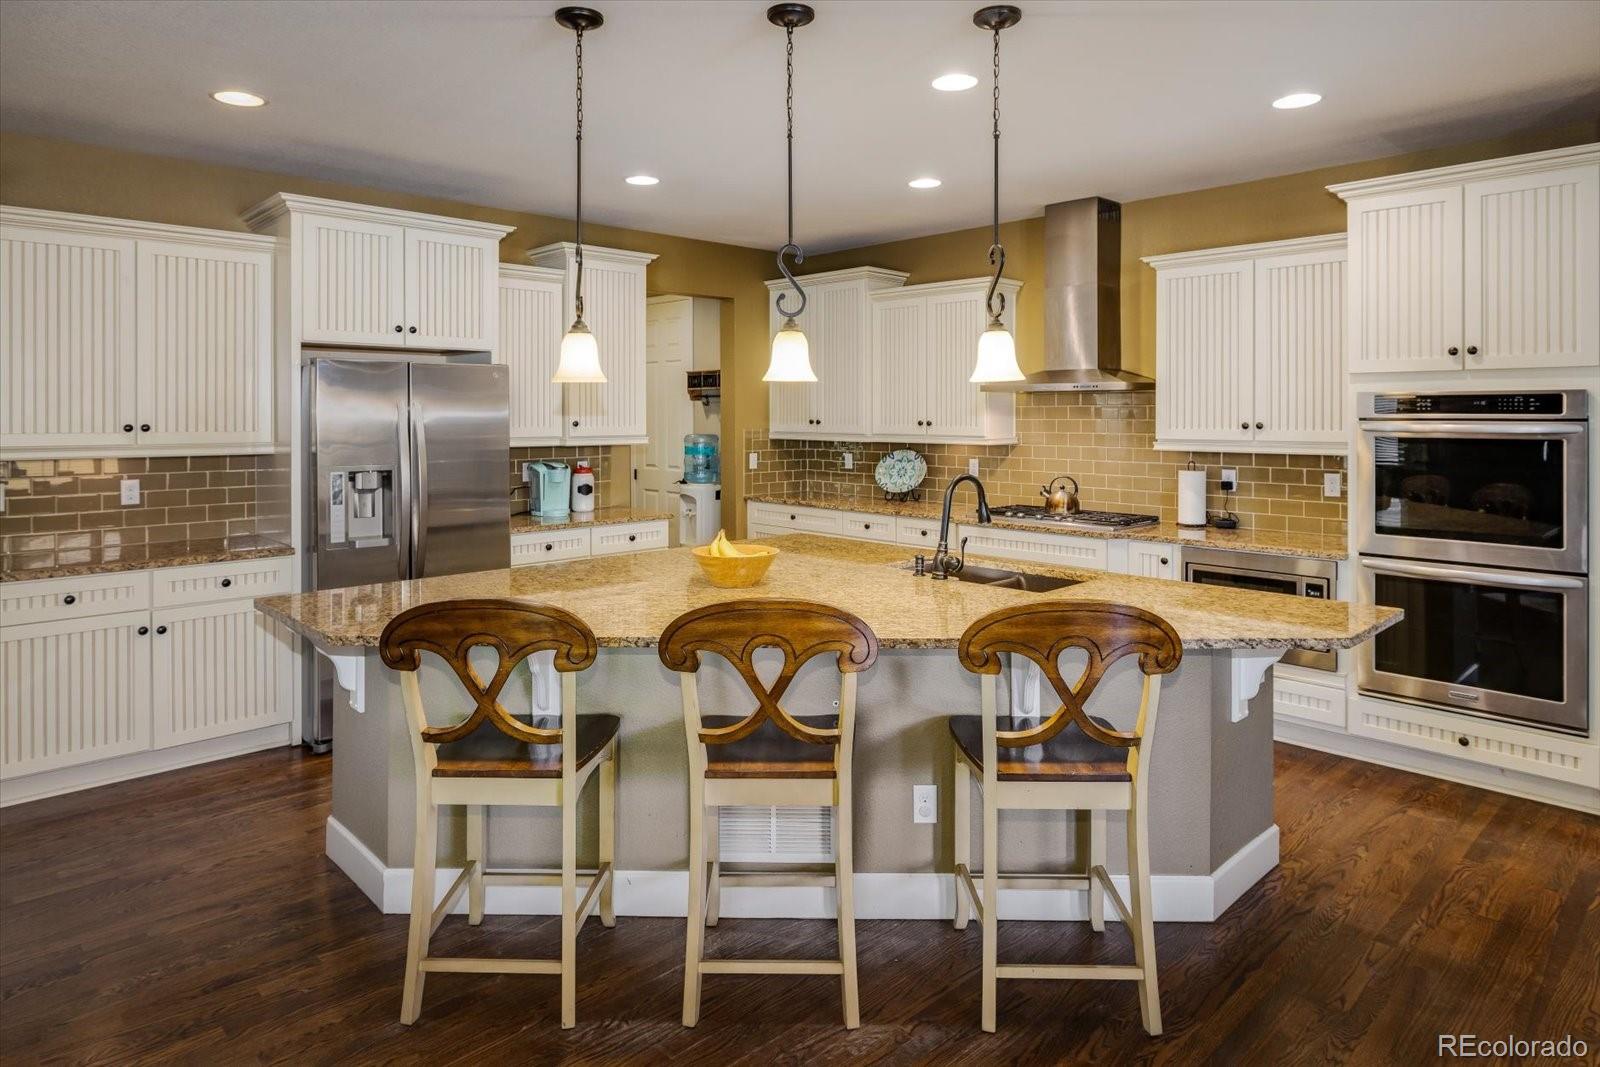 a kitchen with stainless steel appliances kitchen island granite countertop a dining table chairs sink and cabinets